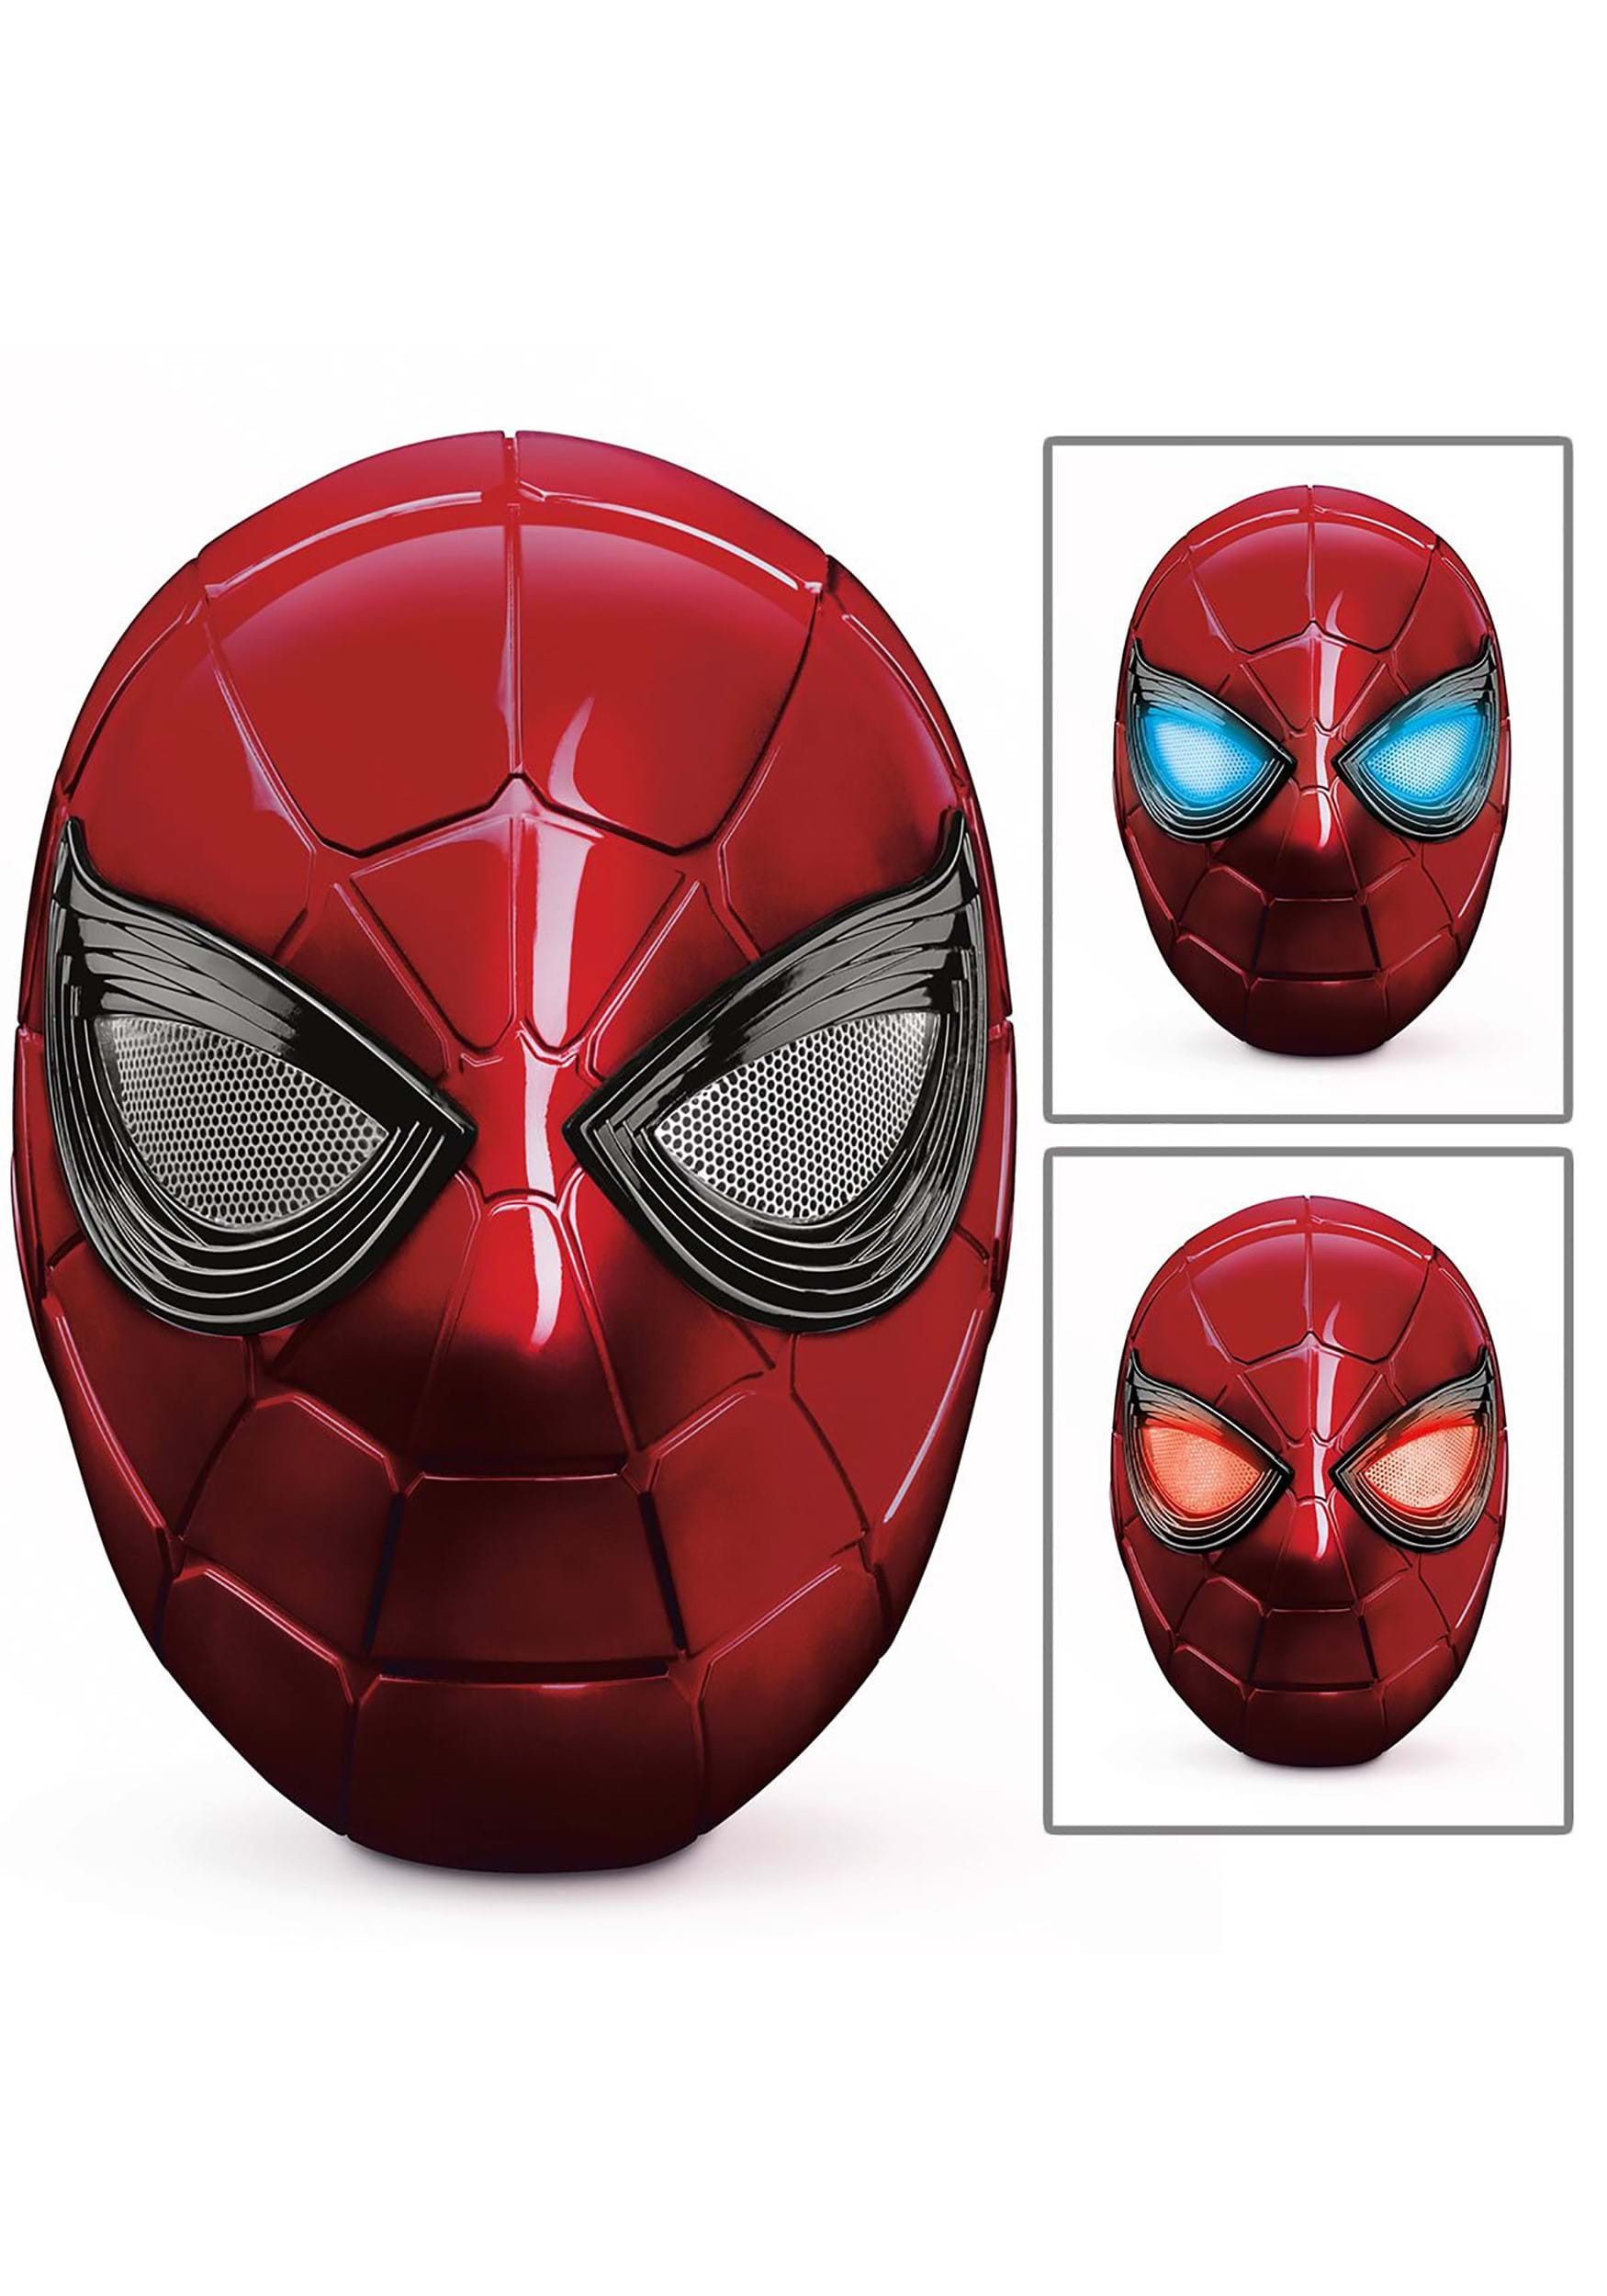 Image of Marvel Spider-Man Iron Spider Electronic Legends Series Helmet ID EEDHSF0201-ST